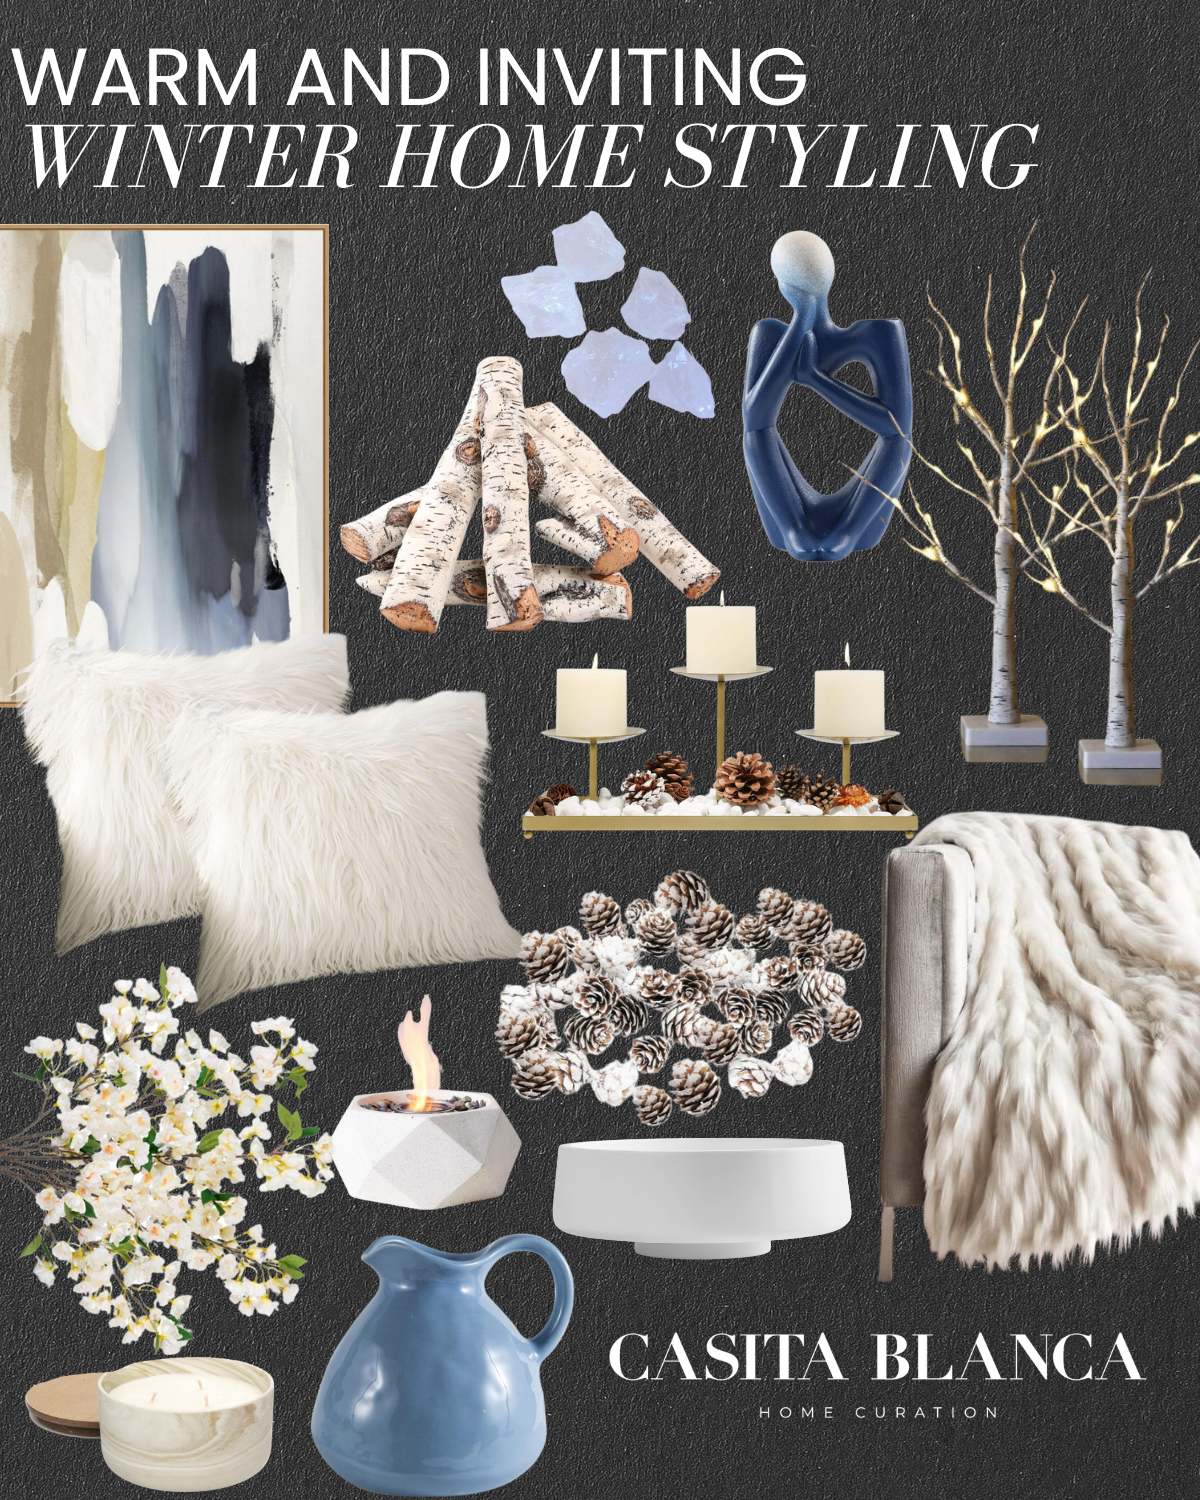 tips for styling your home during the winter months | home, home styling, winter months, winter decor, winter season, home decor, blue, winter blue, white, vase, wall art, faux floral, fire ppit, faux fur, fluffy pillow